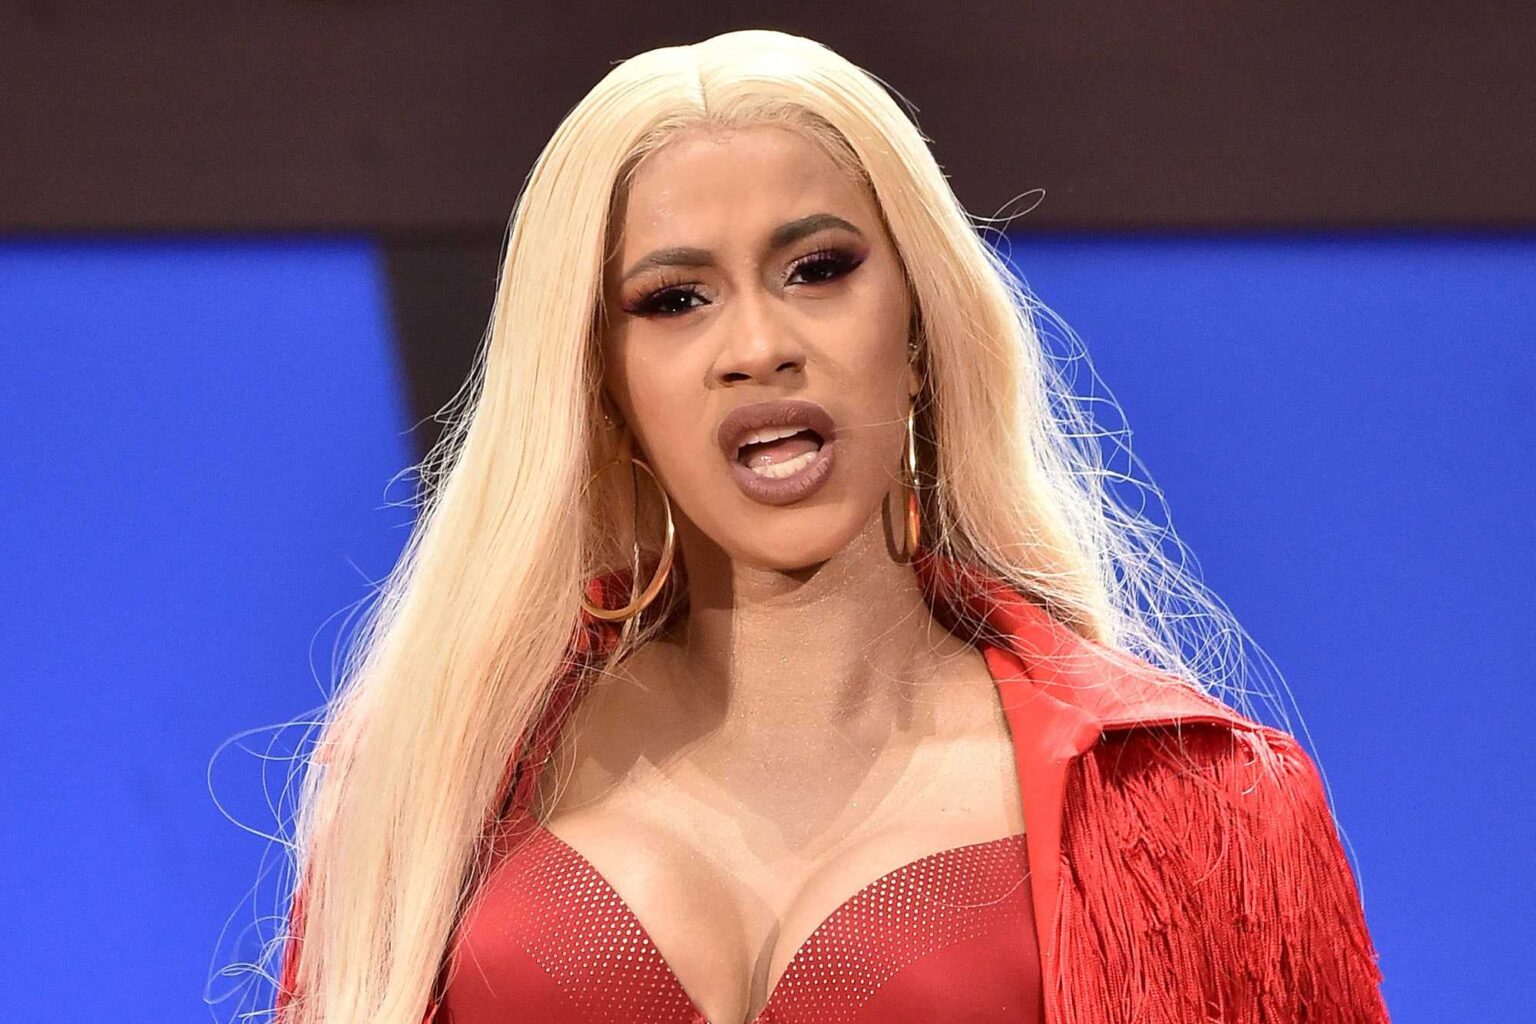 Cardi B has joined the adult platform OnlyFans. How much money is the rapper making from her livestreams?